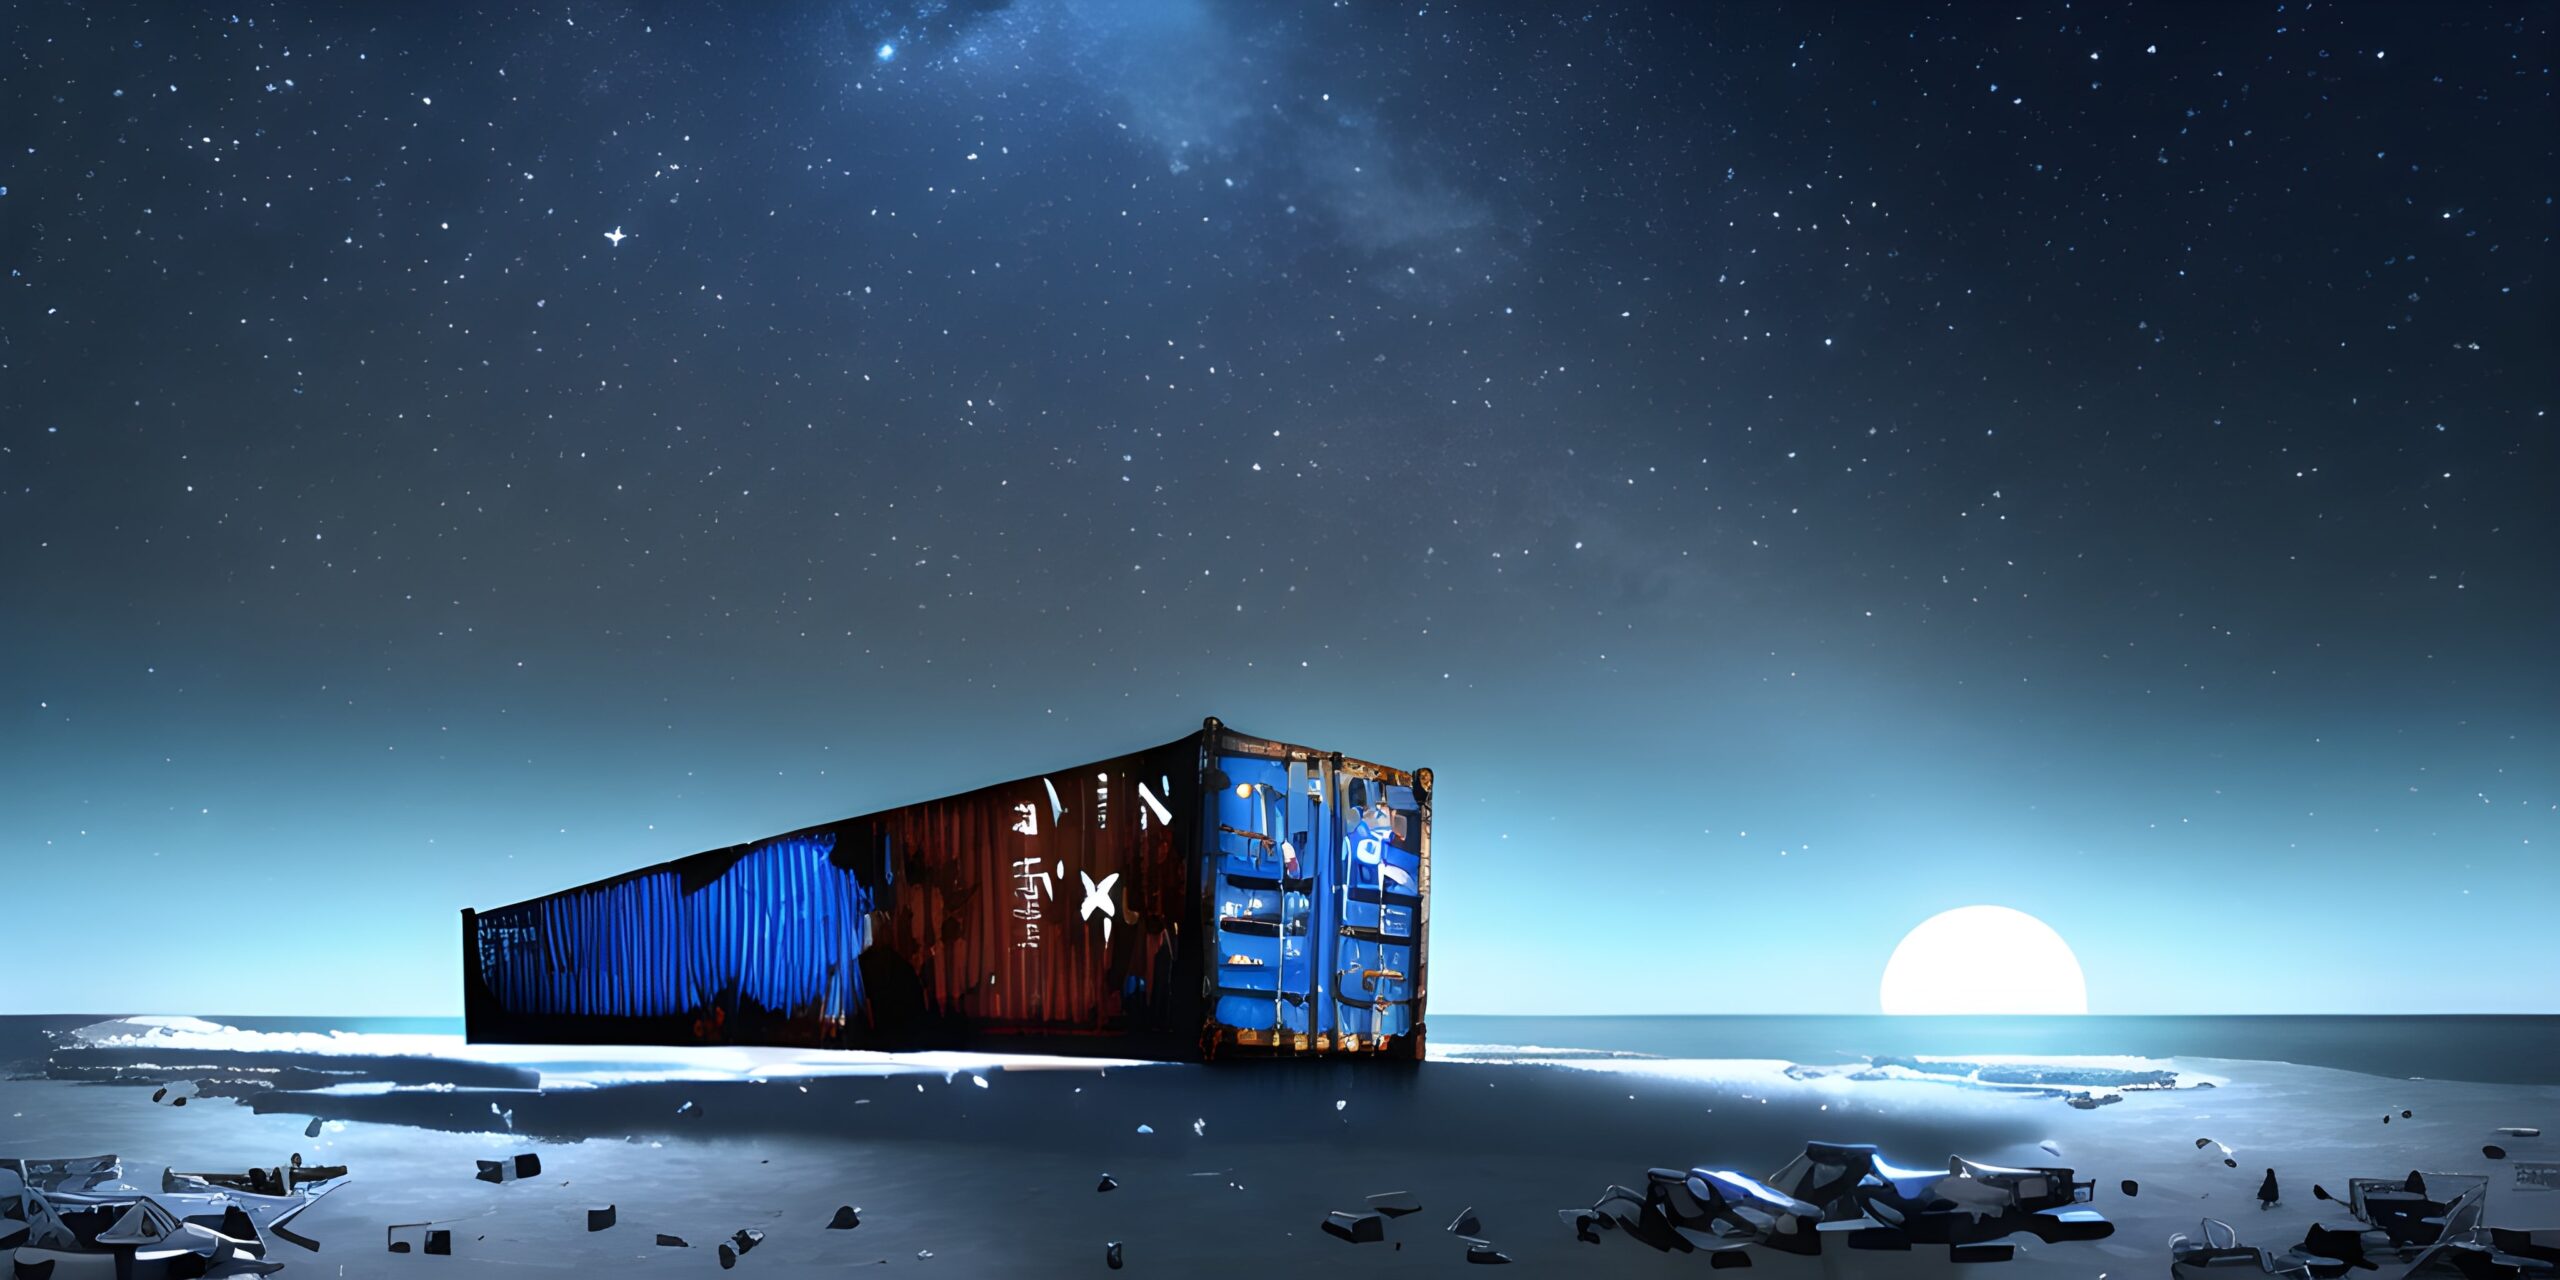 Lost Shipping Container in the Arctic